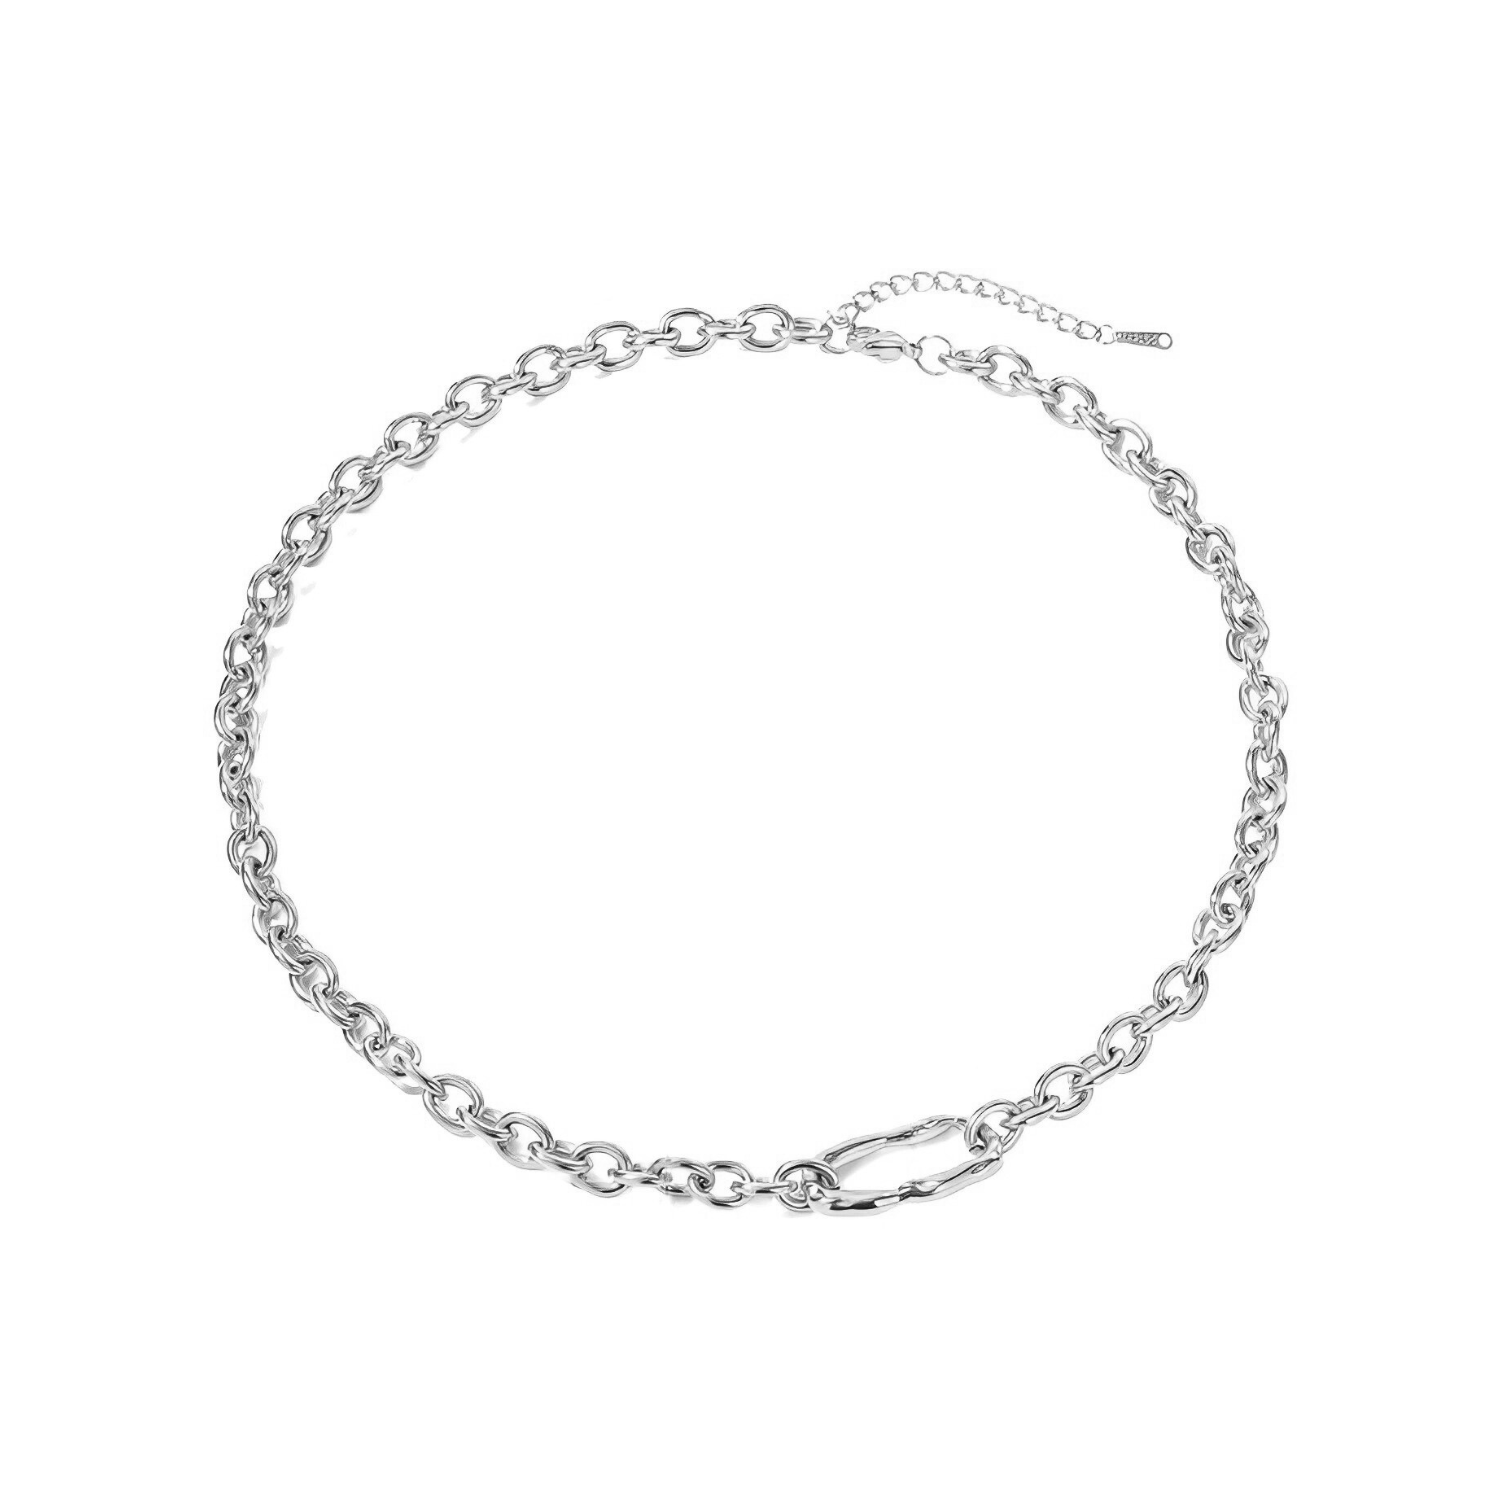 chain, necklace, thick chain, silver necklace, silver chain